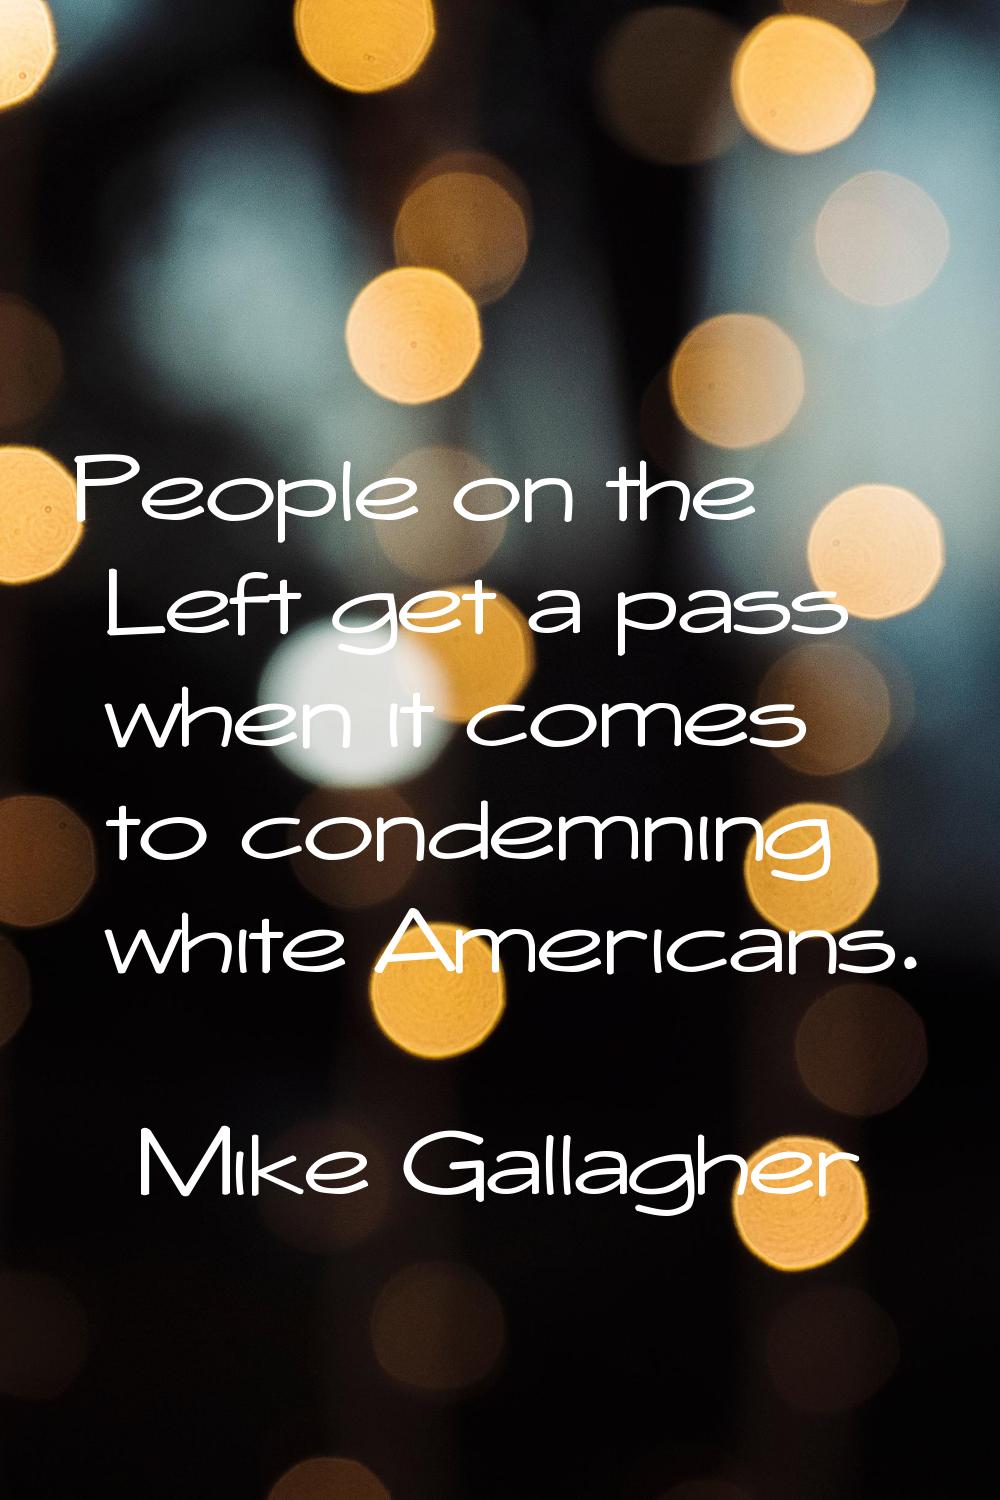 People on the Left get a pass when it comes to condemning white Americans.